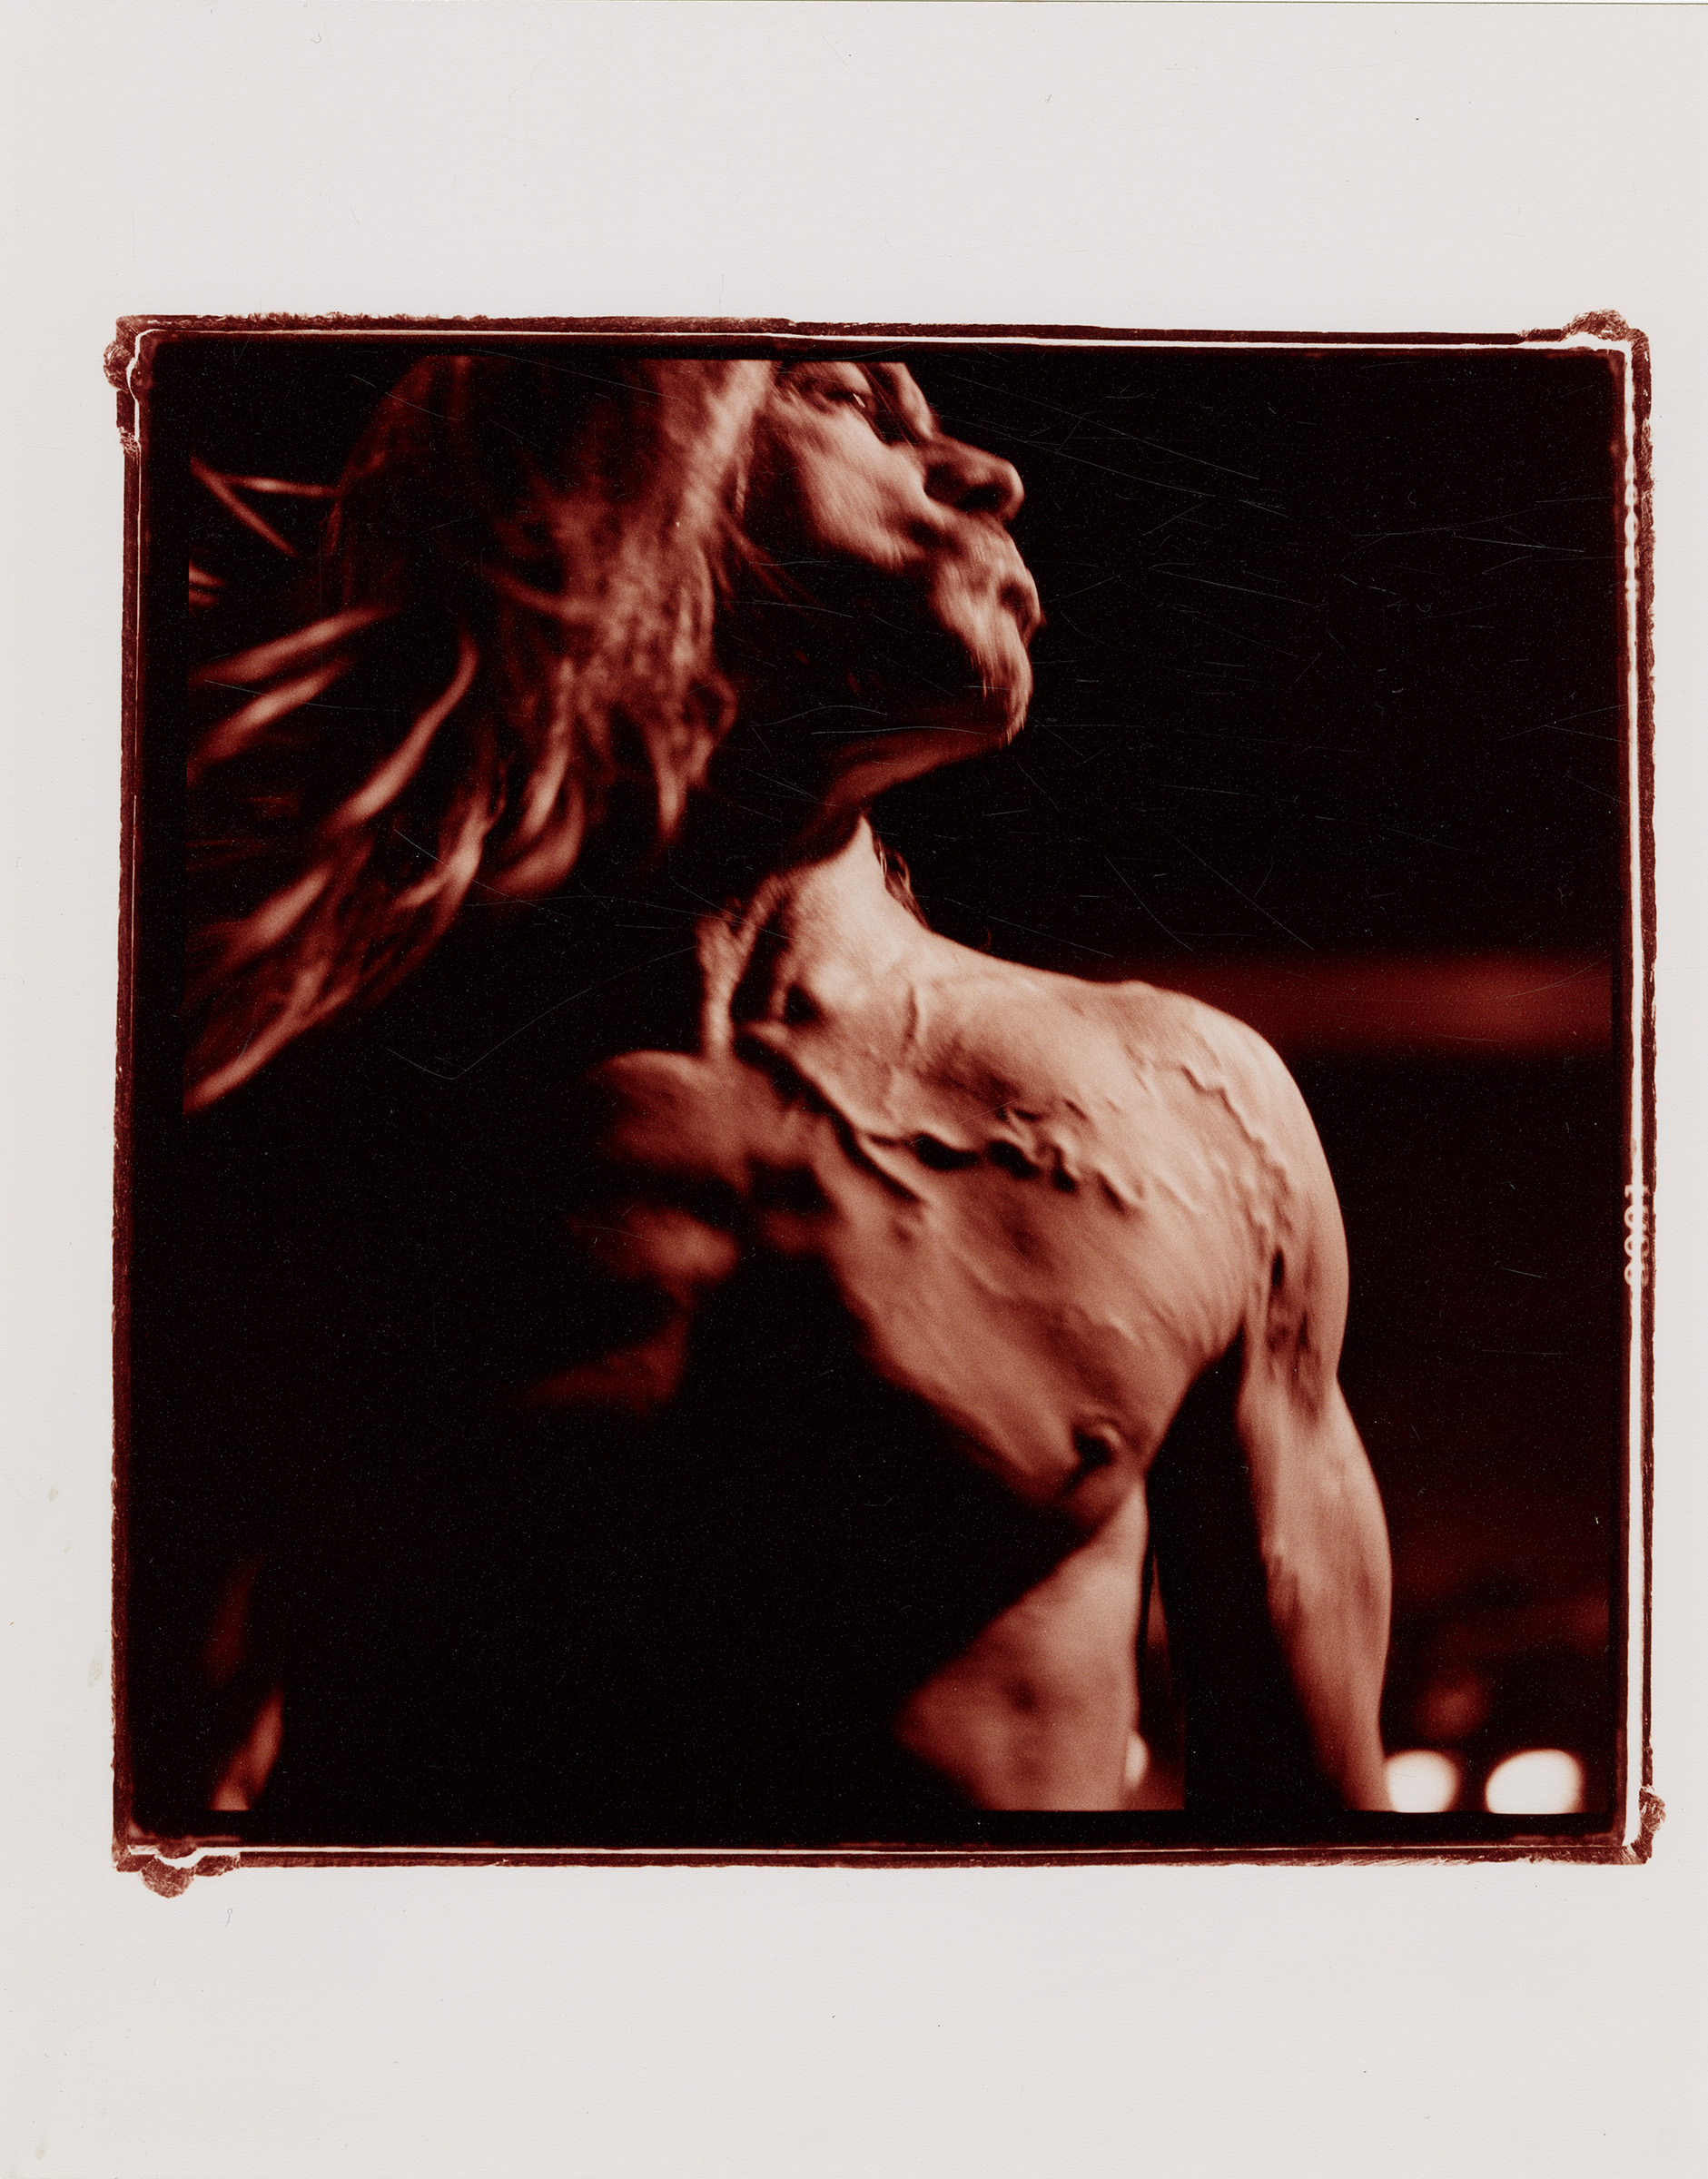 Sam Holden, [Iggy Pop], 2001, chromogenic color print, gelatin silver negatives, cross processed. Collection 255, © Sam Holden Archive, UMBC; Mina and Todd Holden, and Donna Sherman, used with permission